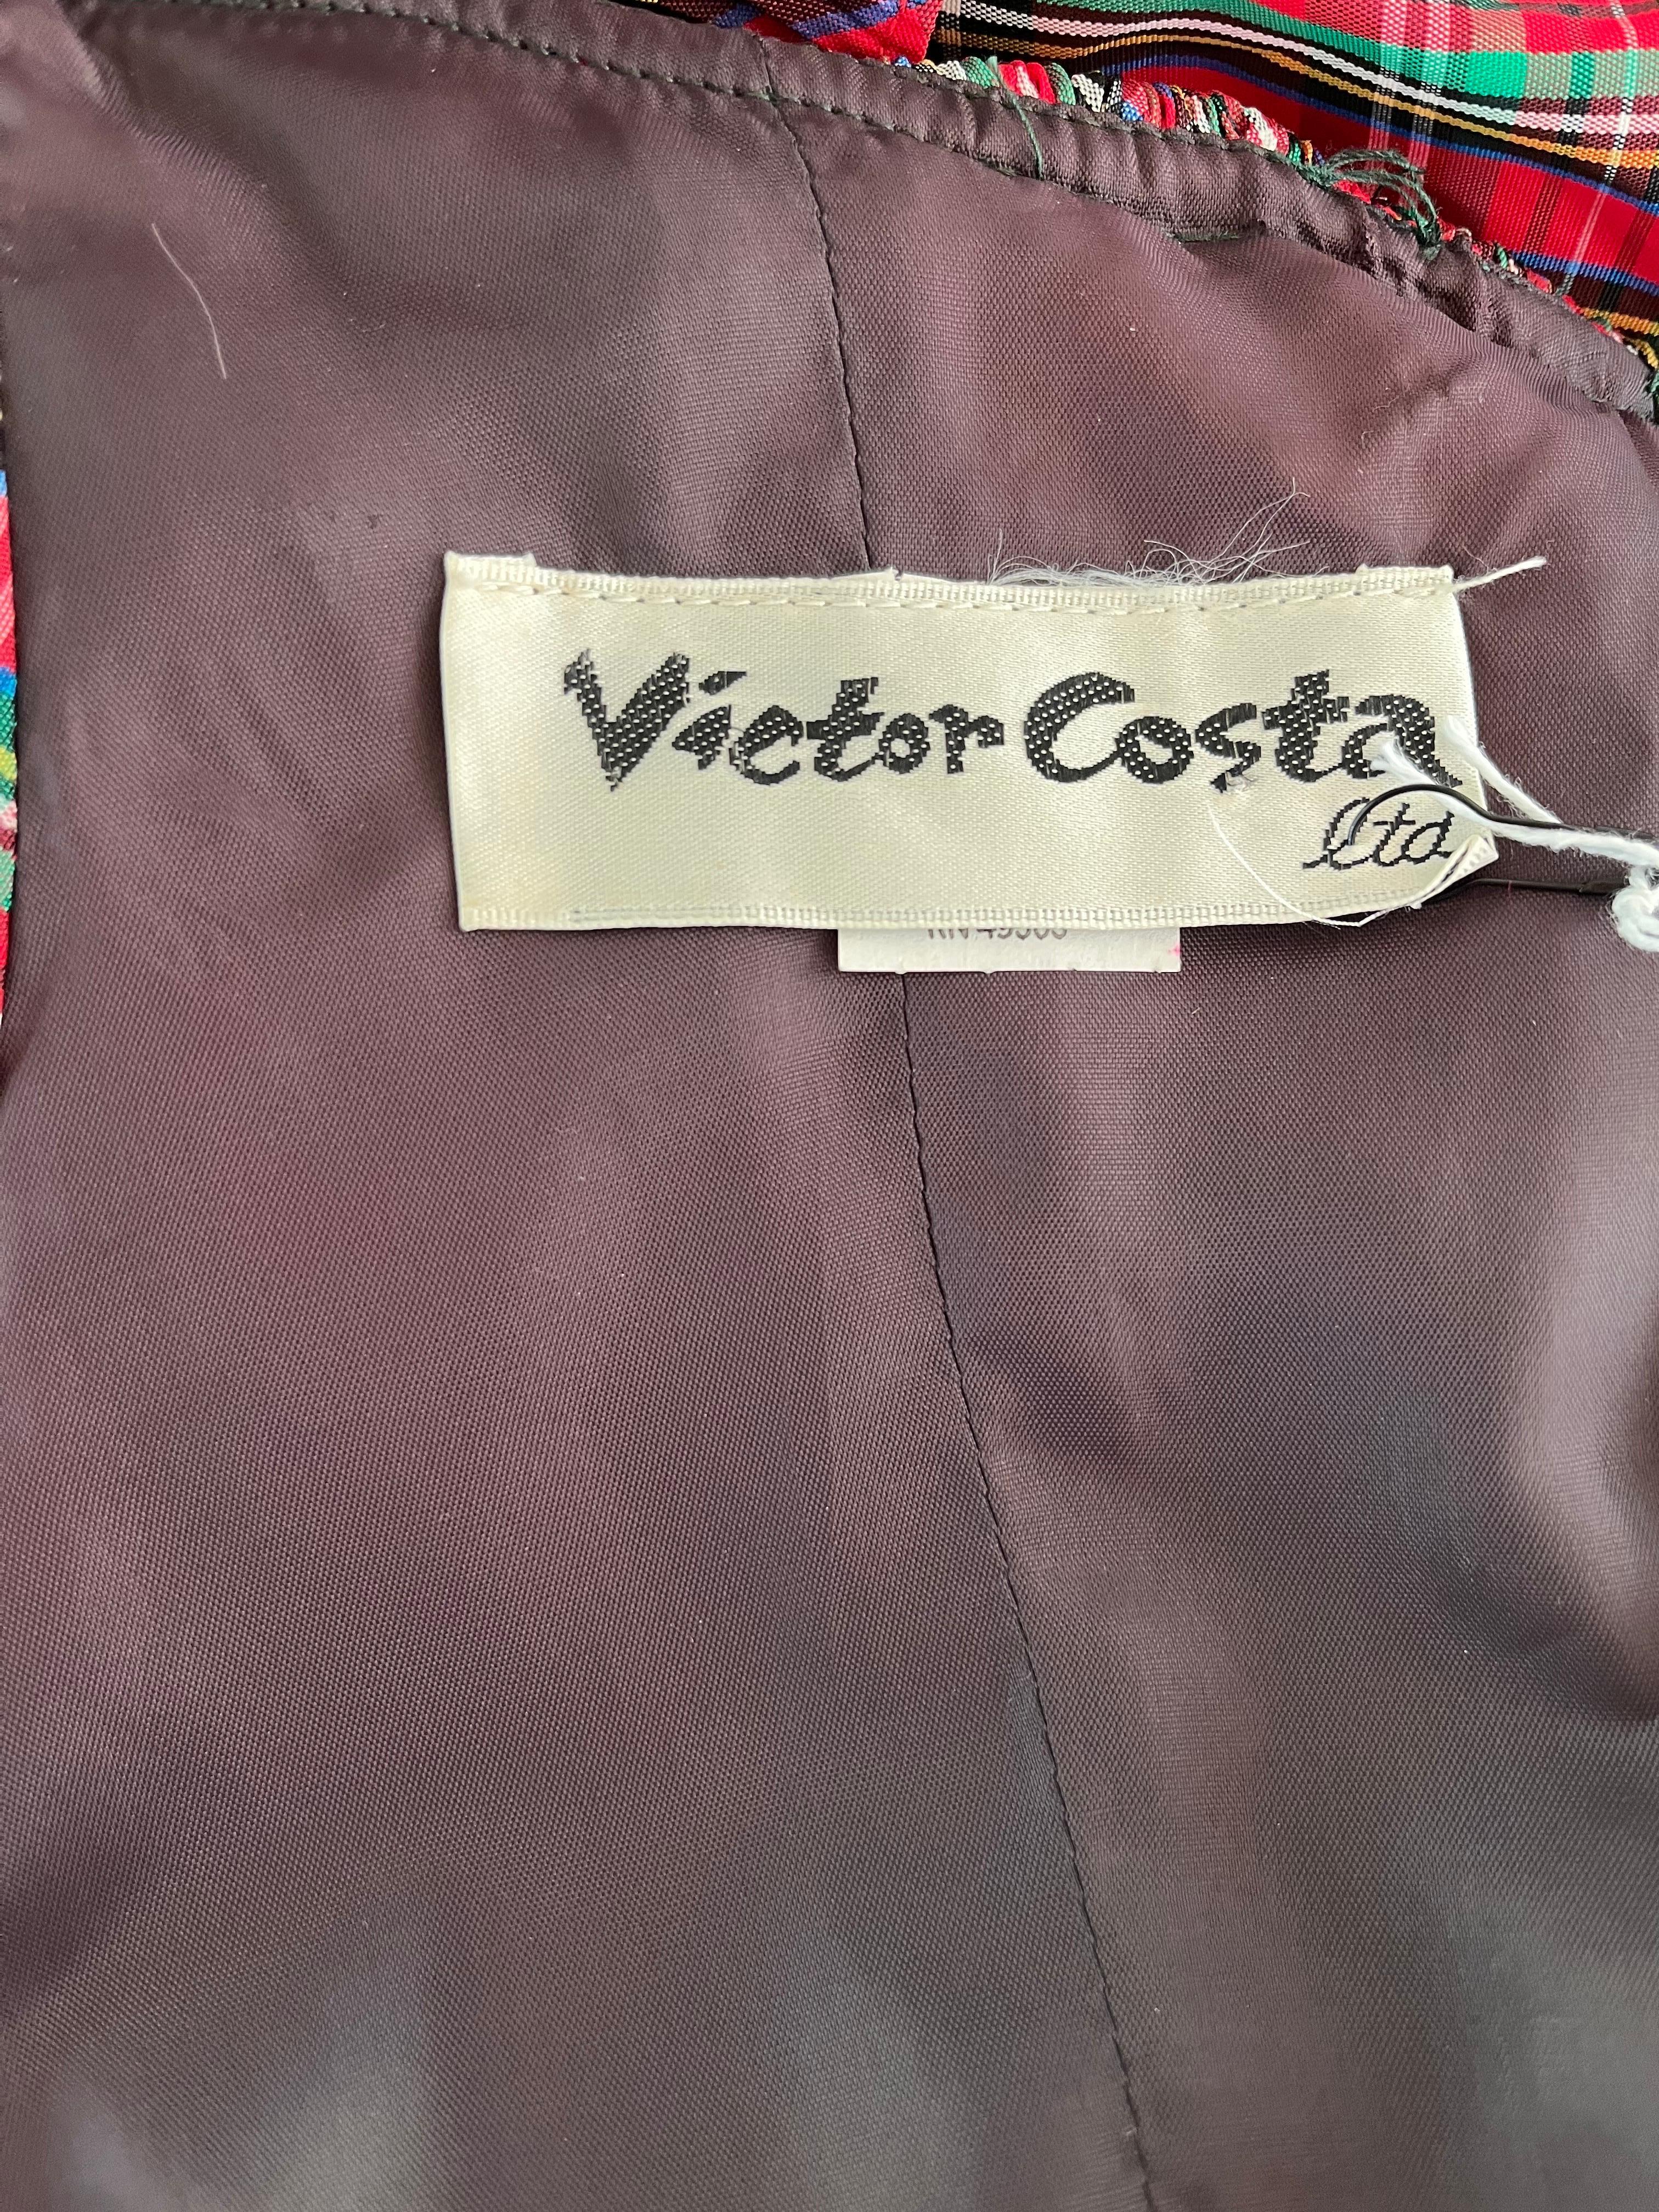 1980s Victor Costa Christmas Maxi Dress  In Excellent Condition For Sale In Miami, FL